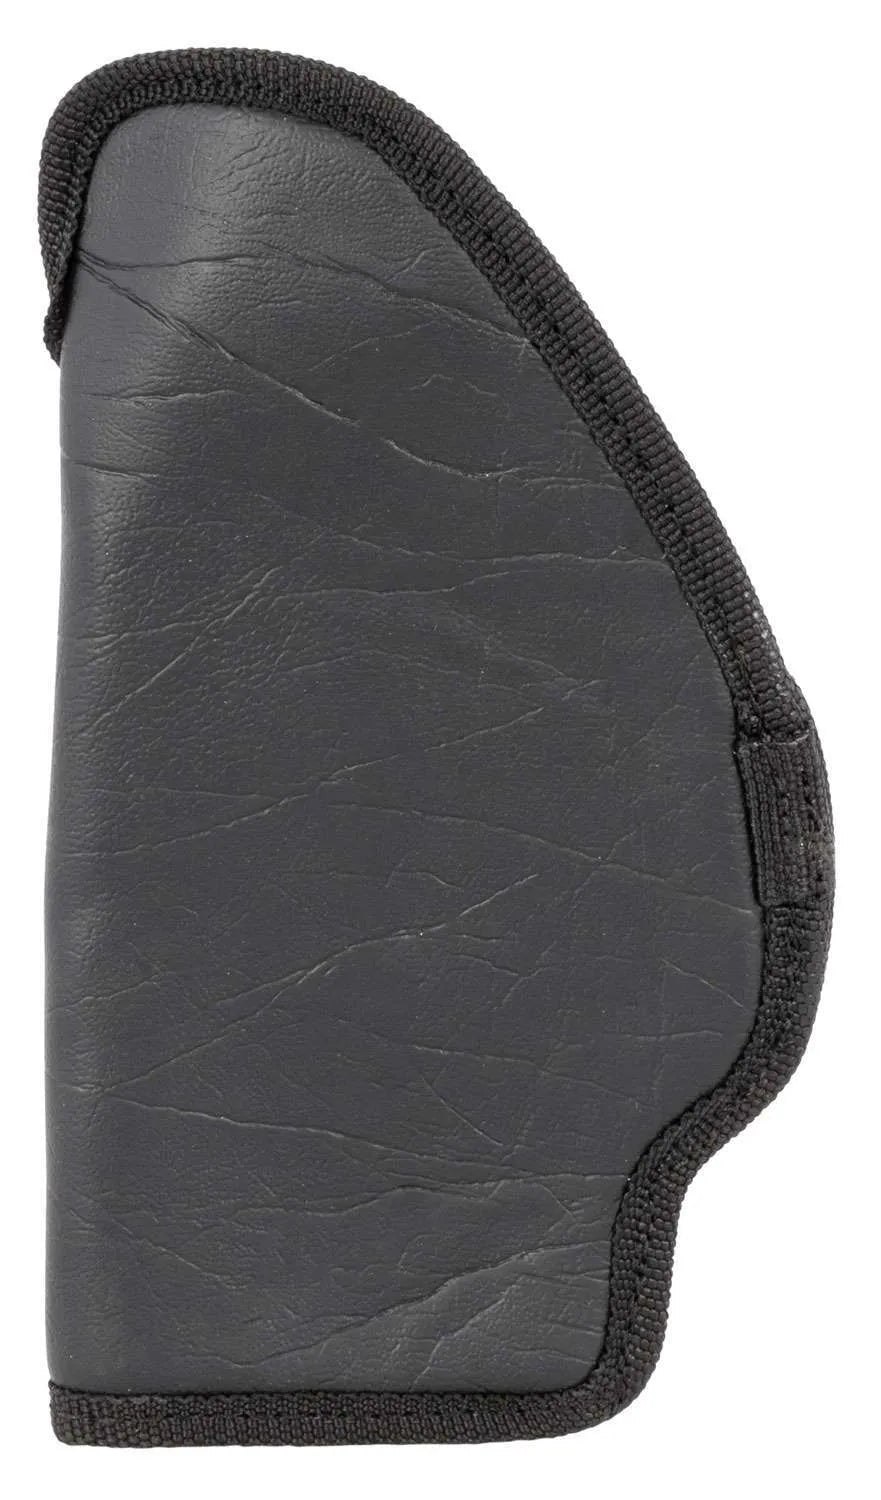 Tagua The Weightless 4-in-1 Black Nylon/Ecoleather IWB Most Single Stack 9/40/45 Right Hand